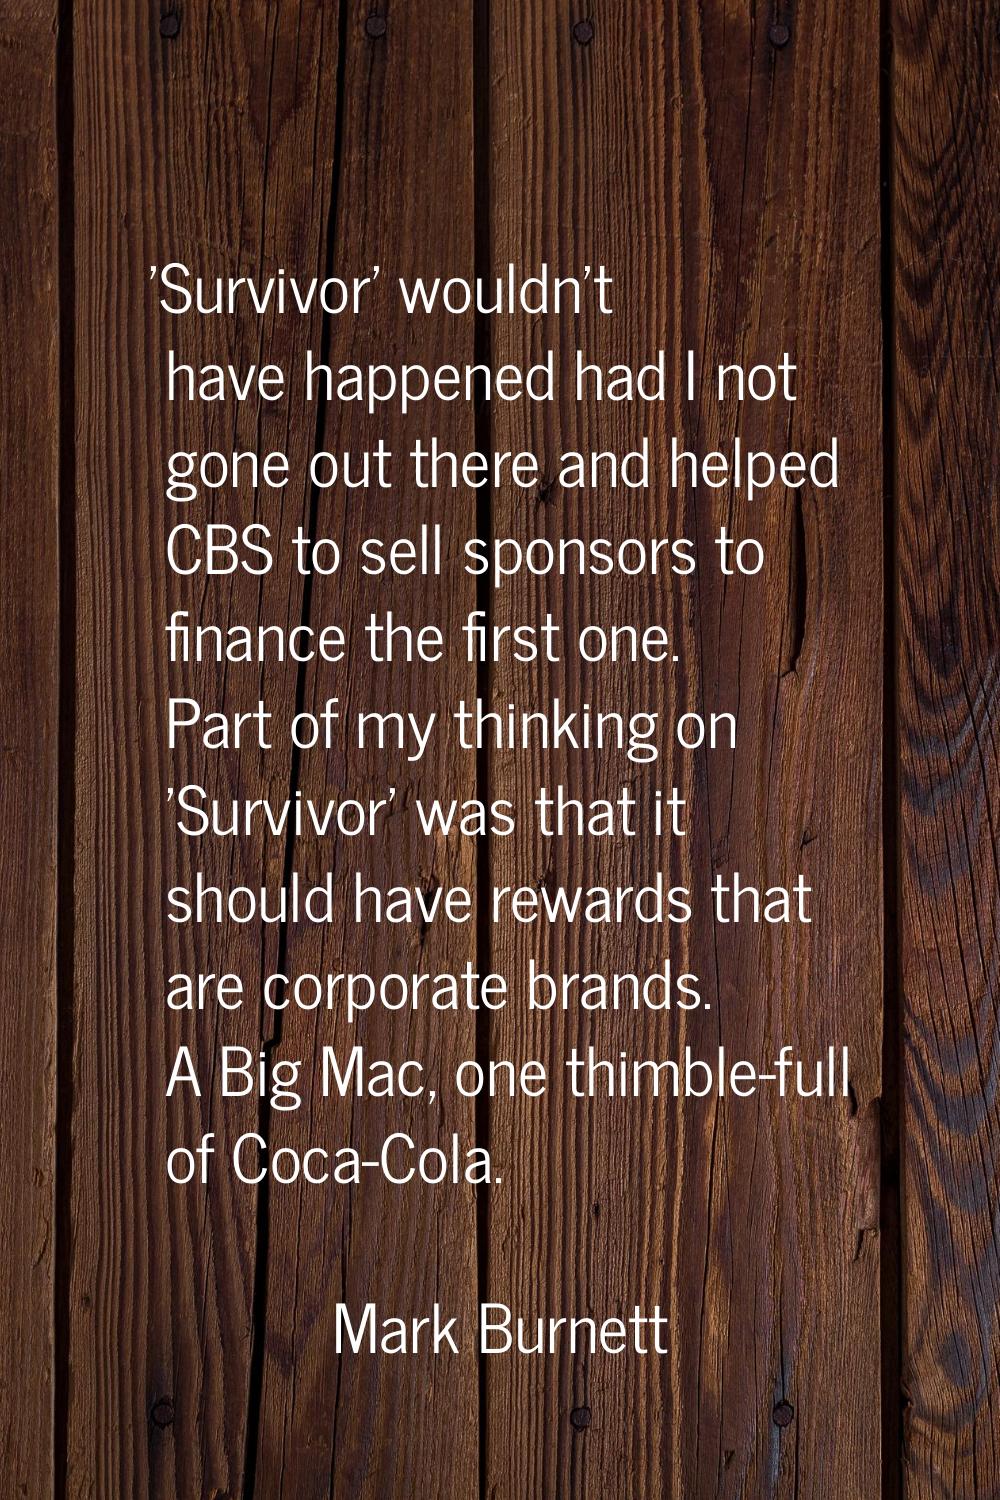 'Survivor' wouldn't have happened had I not gone out there and helped CBS to sell sponsors to finan